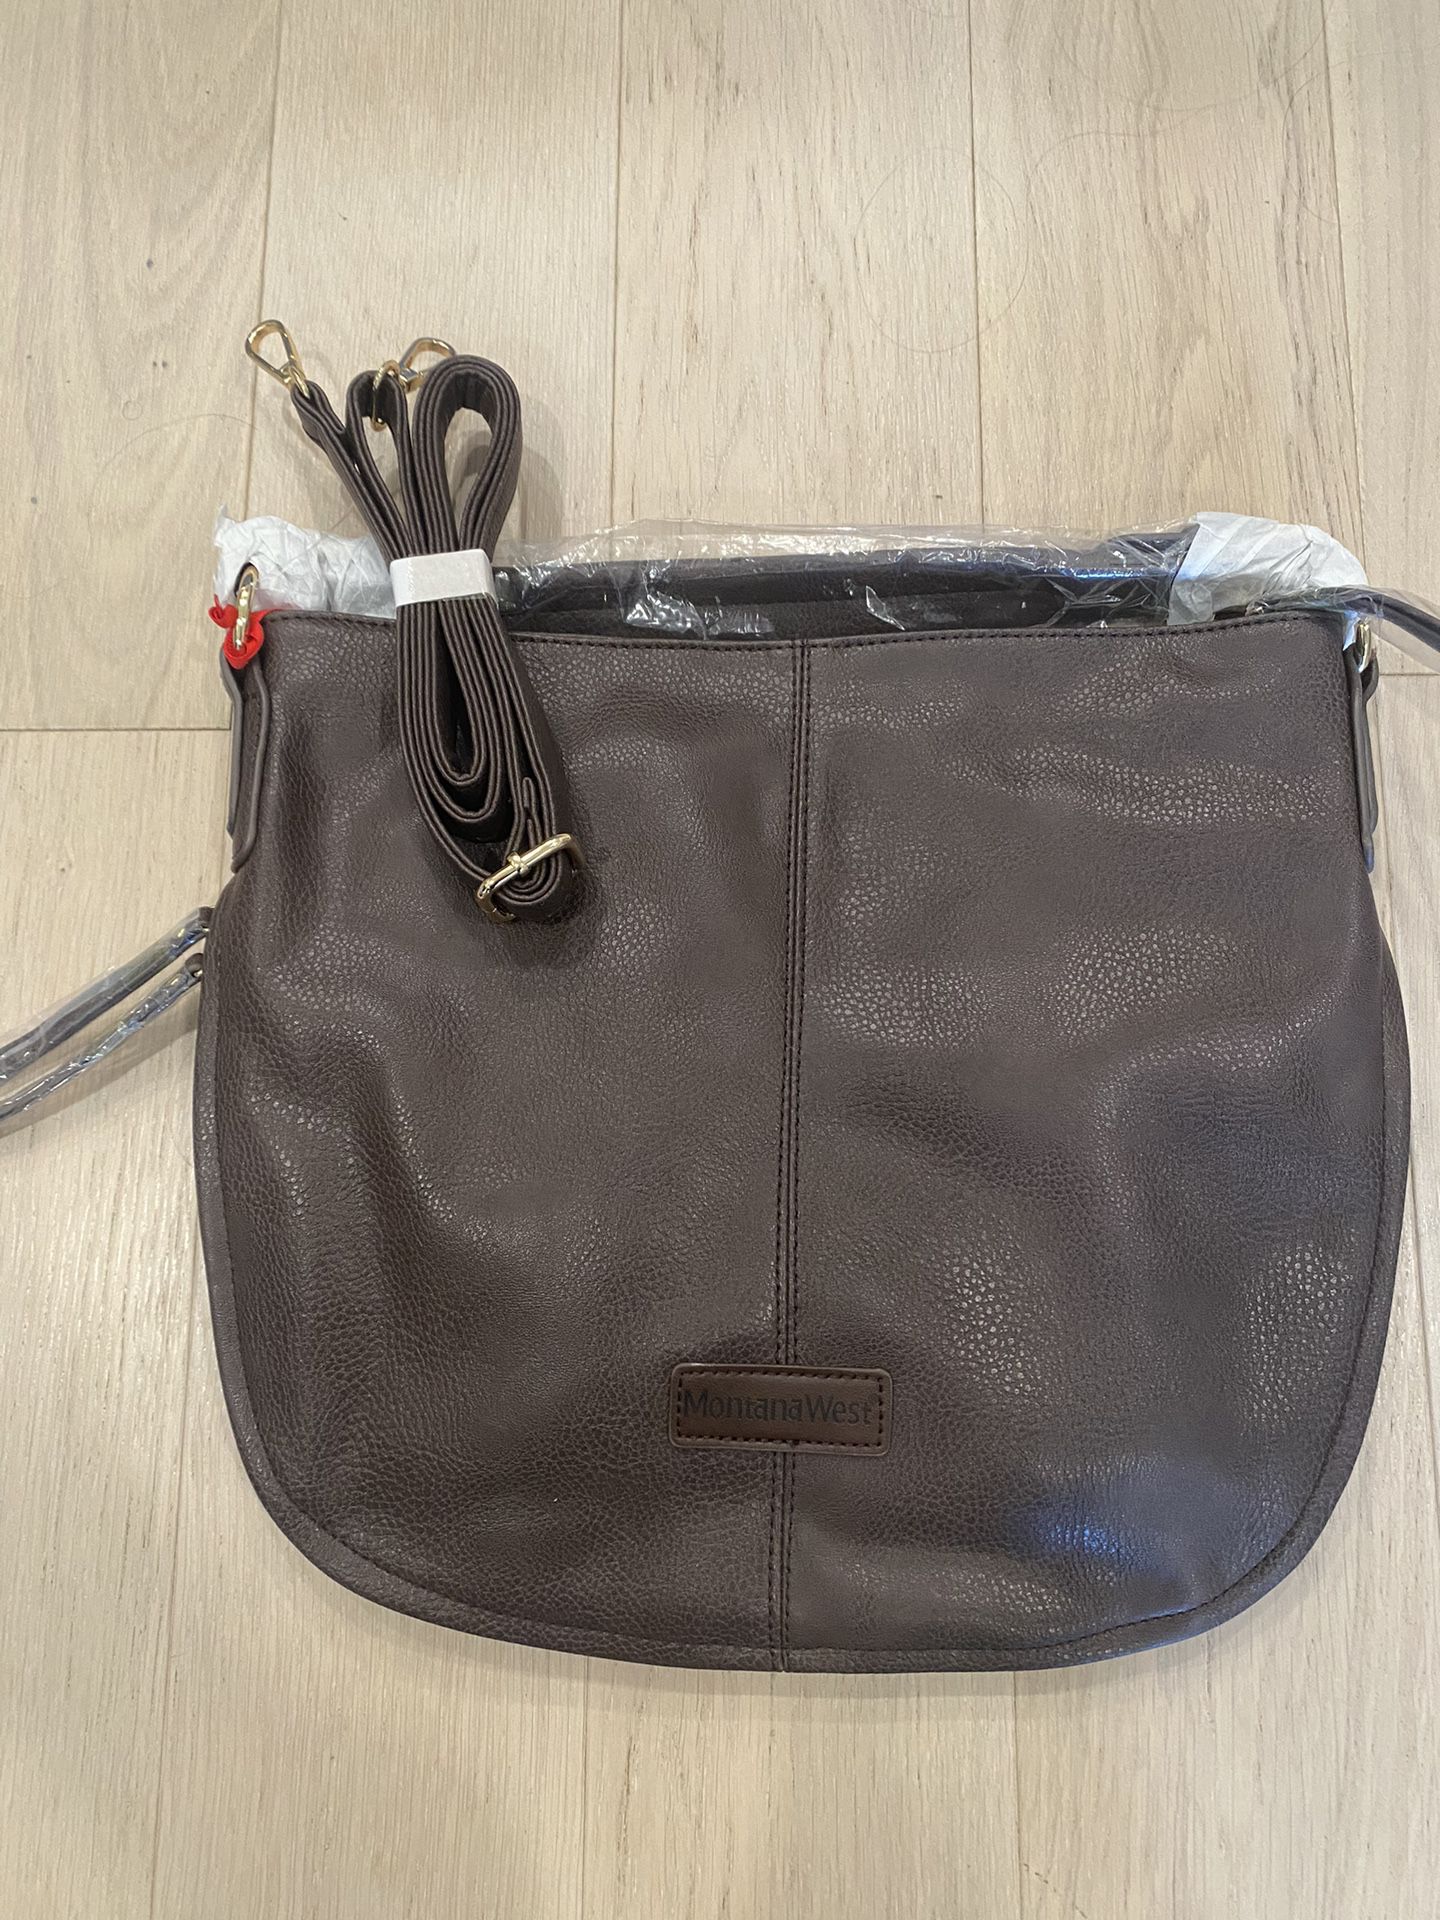 Women’s Brown Leather Purse 